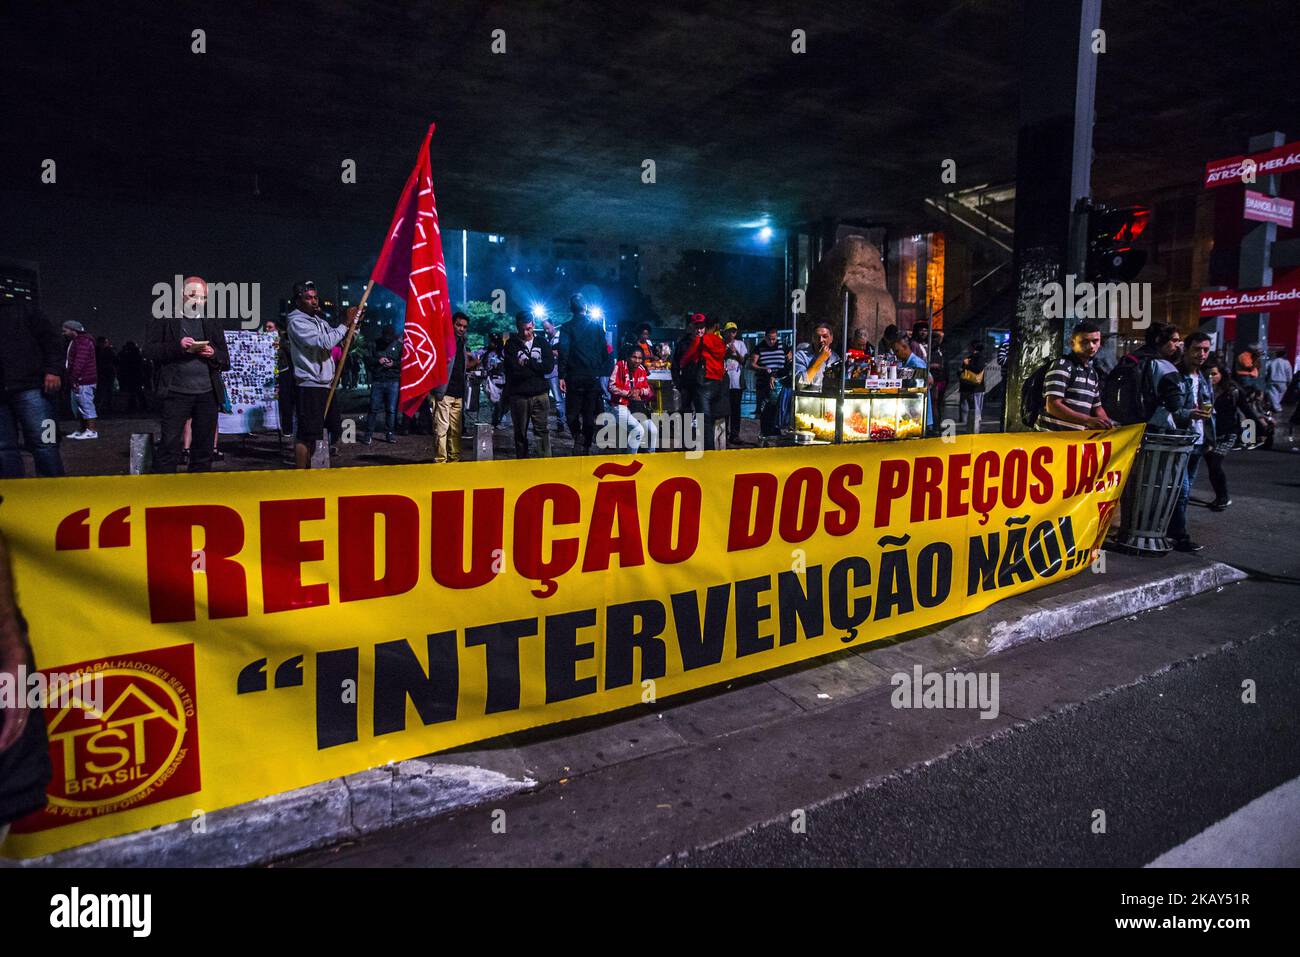 Demonstrators protest against high fuel and cooking gas costs in front of Petrobras oil company headquarters in Sao Paulo, Brazil on May 30, 2018. Protesters protest at Petrobras on Avenida Paulista on the first day of a strike against high fuel and gas costs and demanding the resignation of Petrobras president Pedro Parente in São Paulo, Brazil, on May 30, 2018. - Workers of the oil sector started a three-day strike on Wednesday in at least eight refineries, when the country suffered a trucker protest. The strike continued despite a court ruling that it was illegal and the threat of steep fin Stock Photo